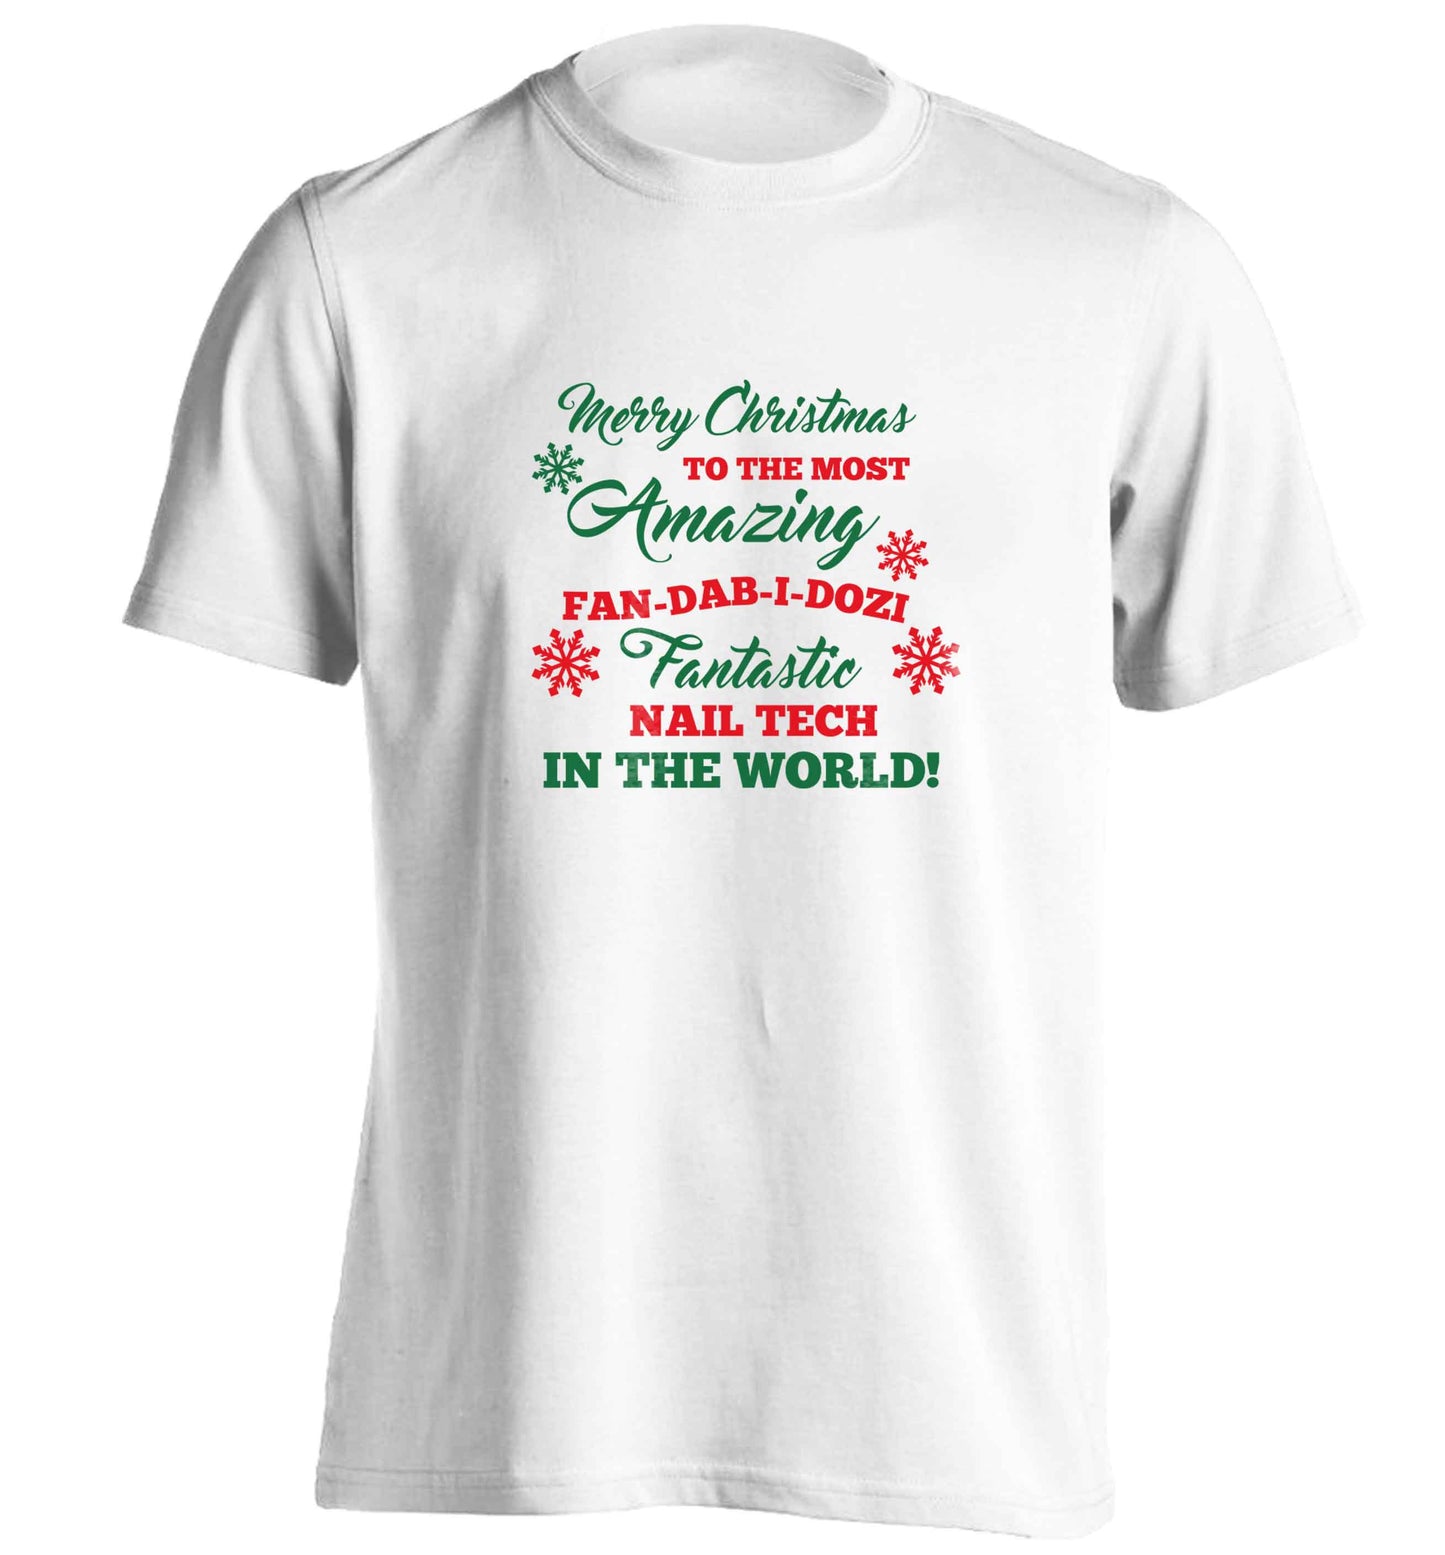 Merry Christmas to the most amazing fan-dab-i-dozi fantasic nail technician in the world adults unisex white Tshirt 2XL